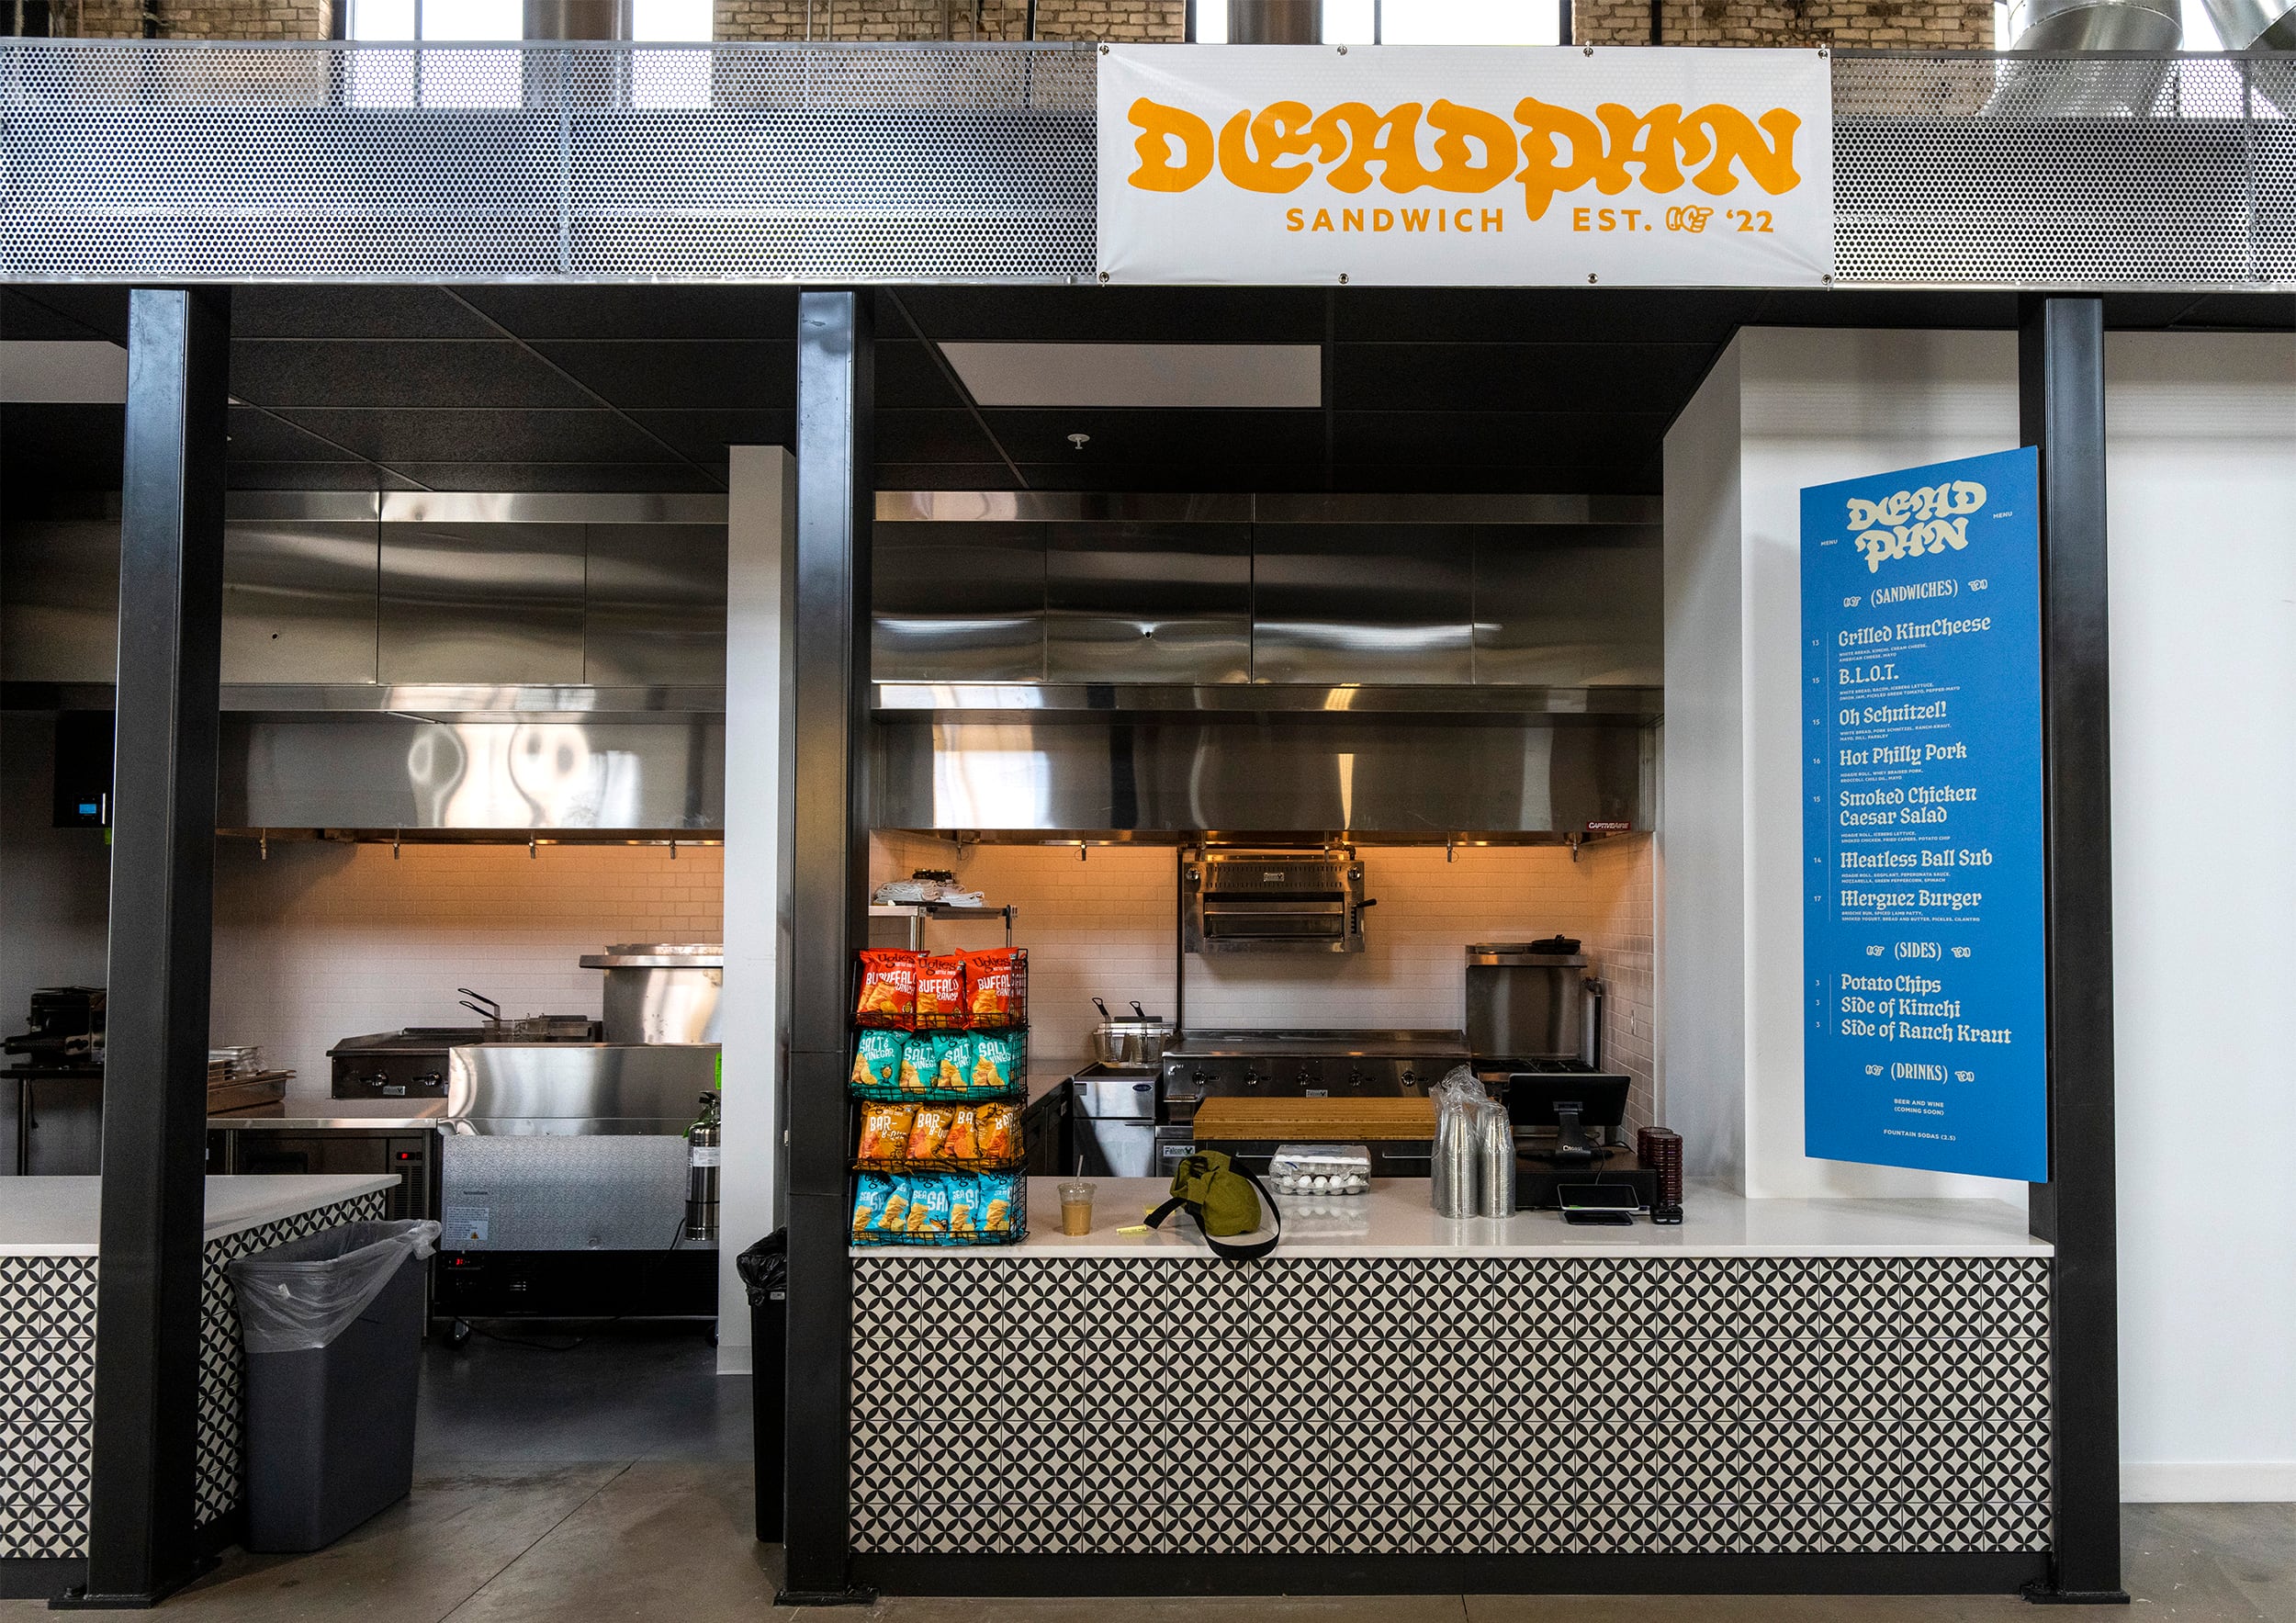 (Rick Egan | The Salt Lake Tribune) Deadpan Sandwich's stall in the Woodbine Food Hall in the Granary District, shown on Tuesday, Aug. 2, 2022.
